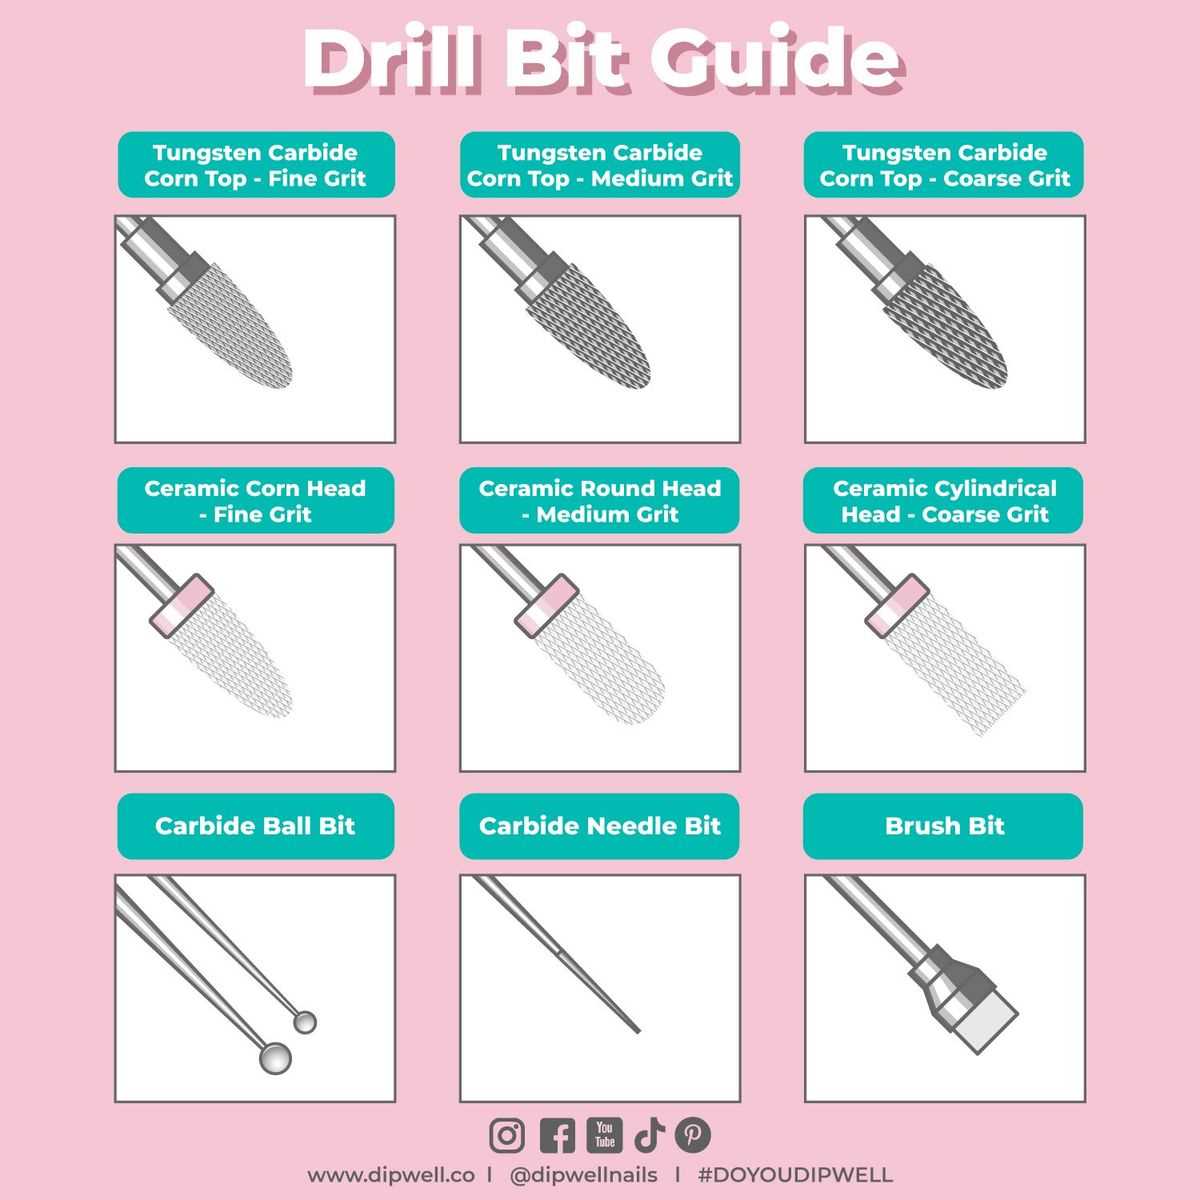 2. Use the Right Drill Bit